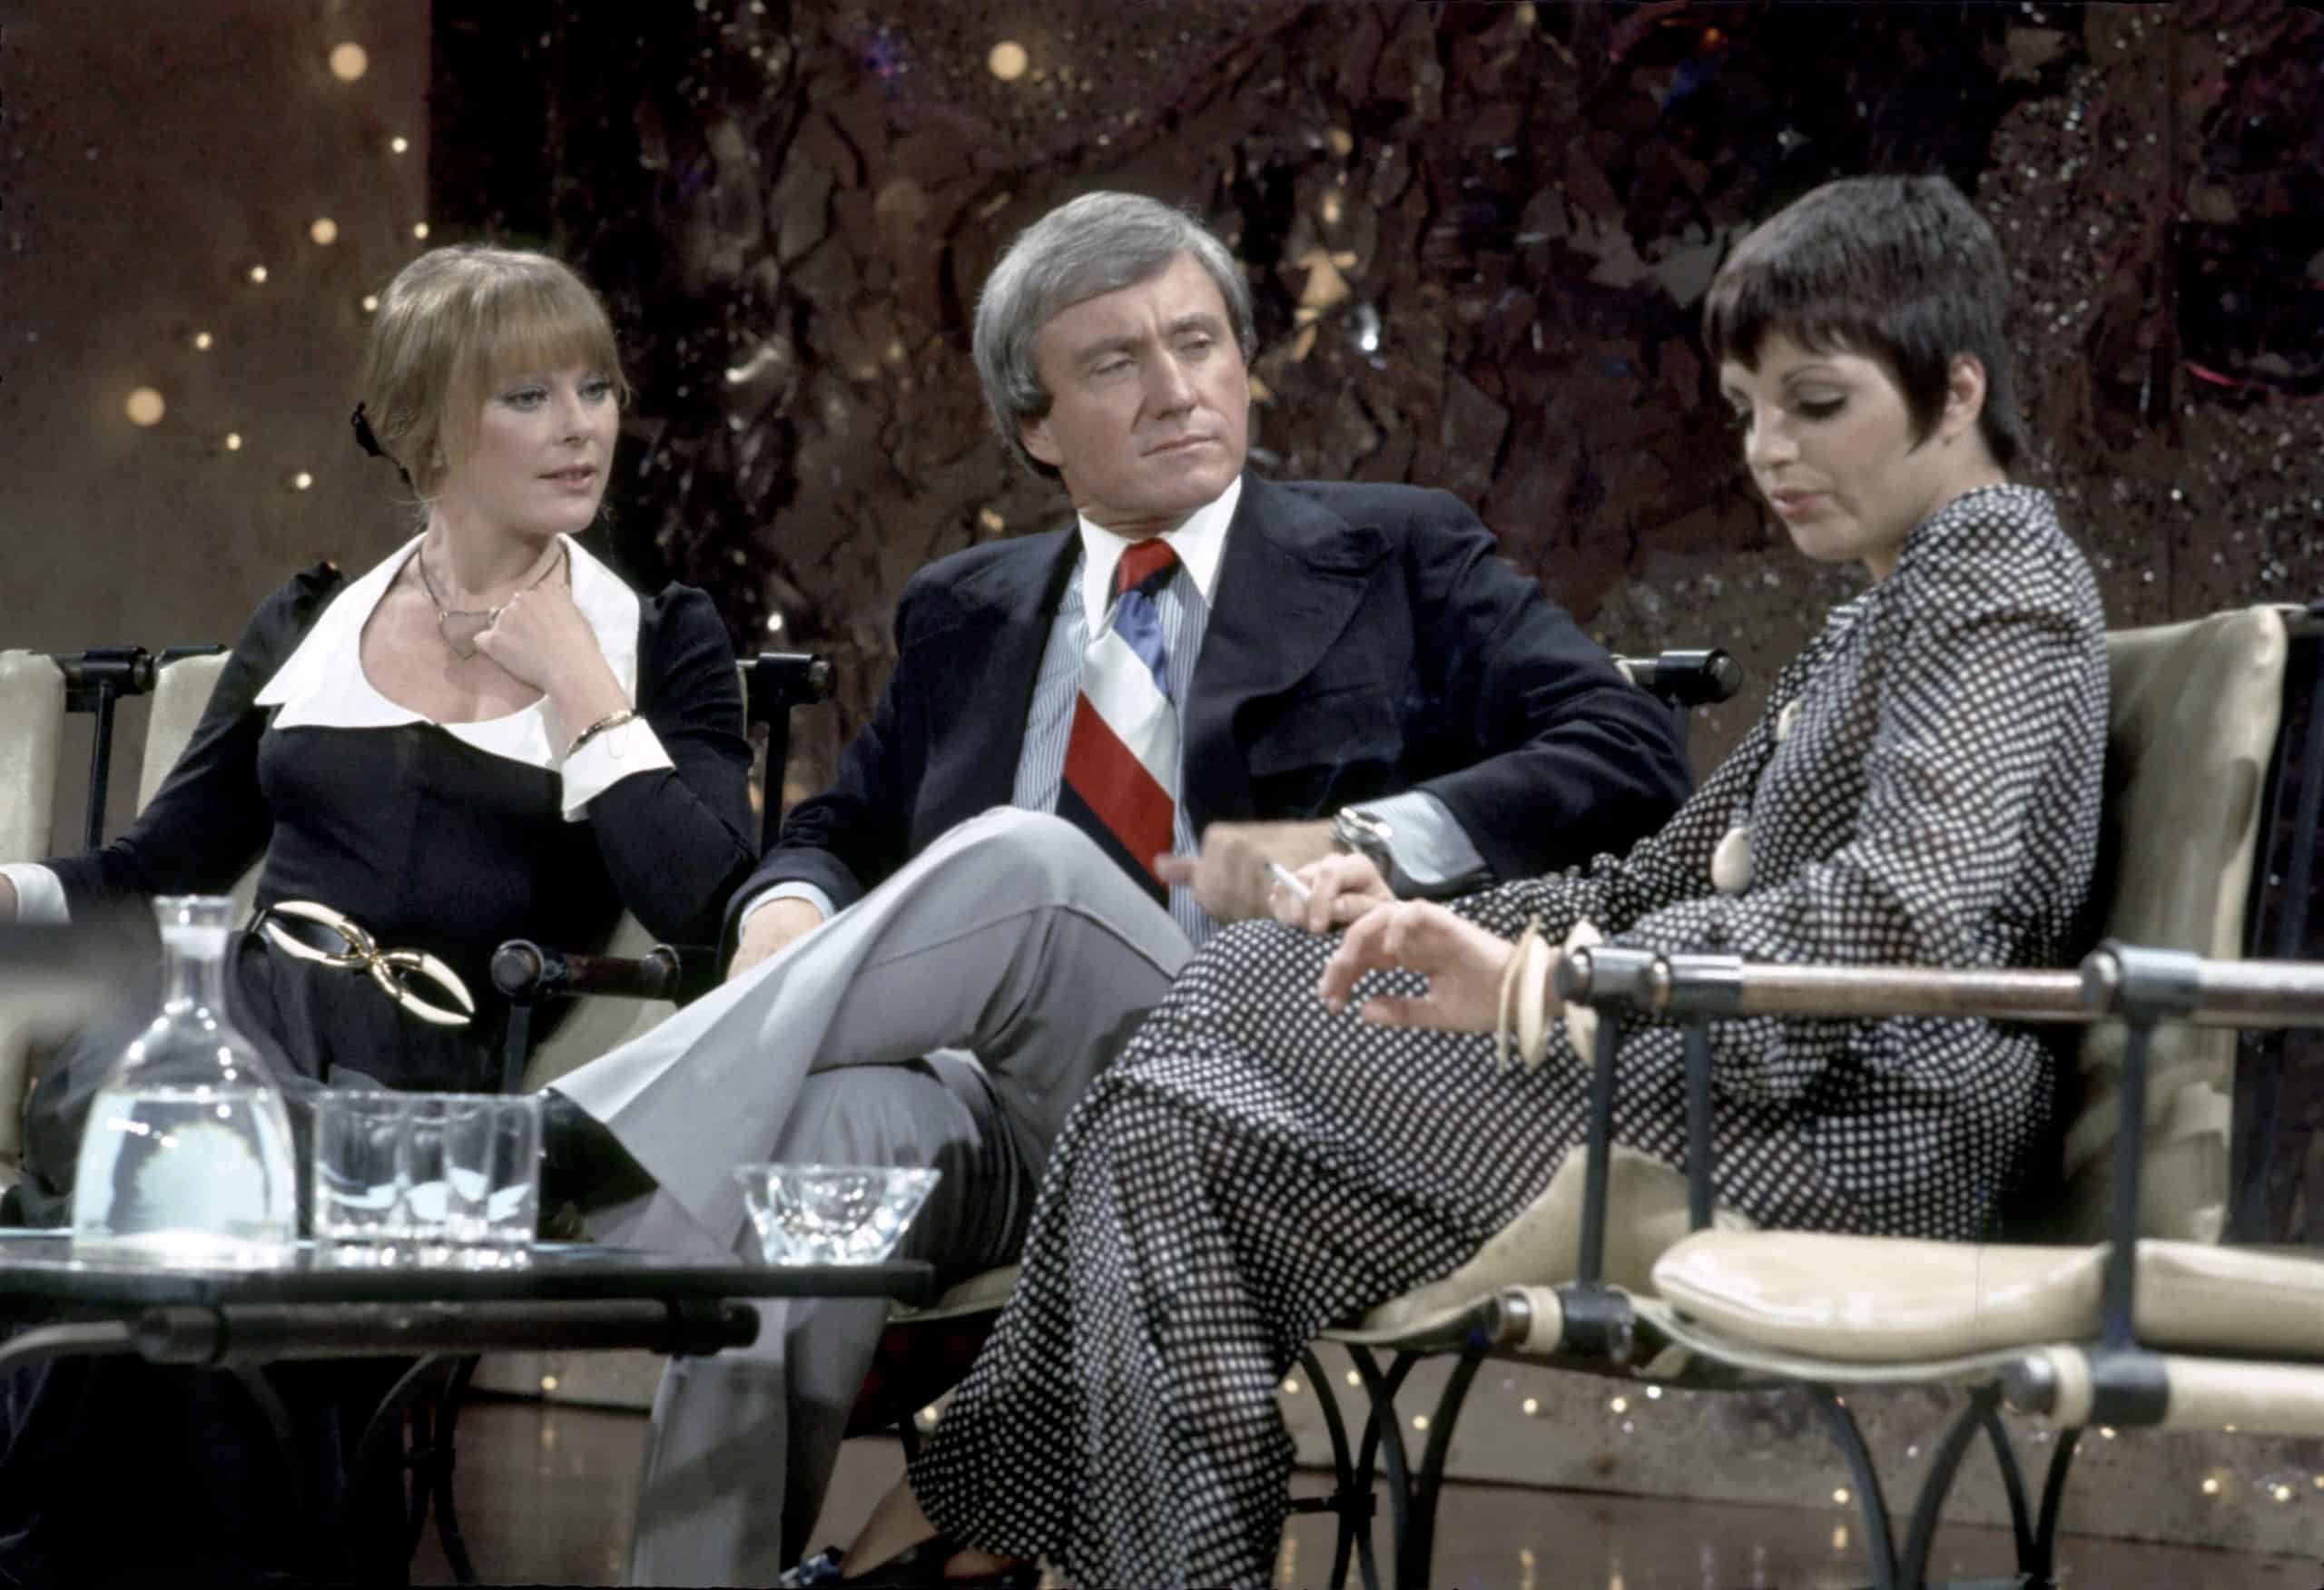 Merv Griffin With Guests Louise Lasser and Liza Minnelli